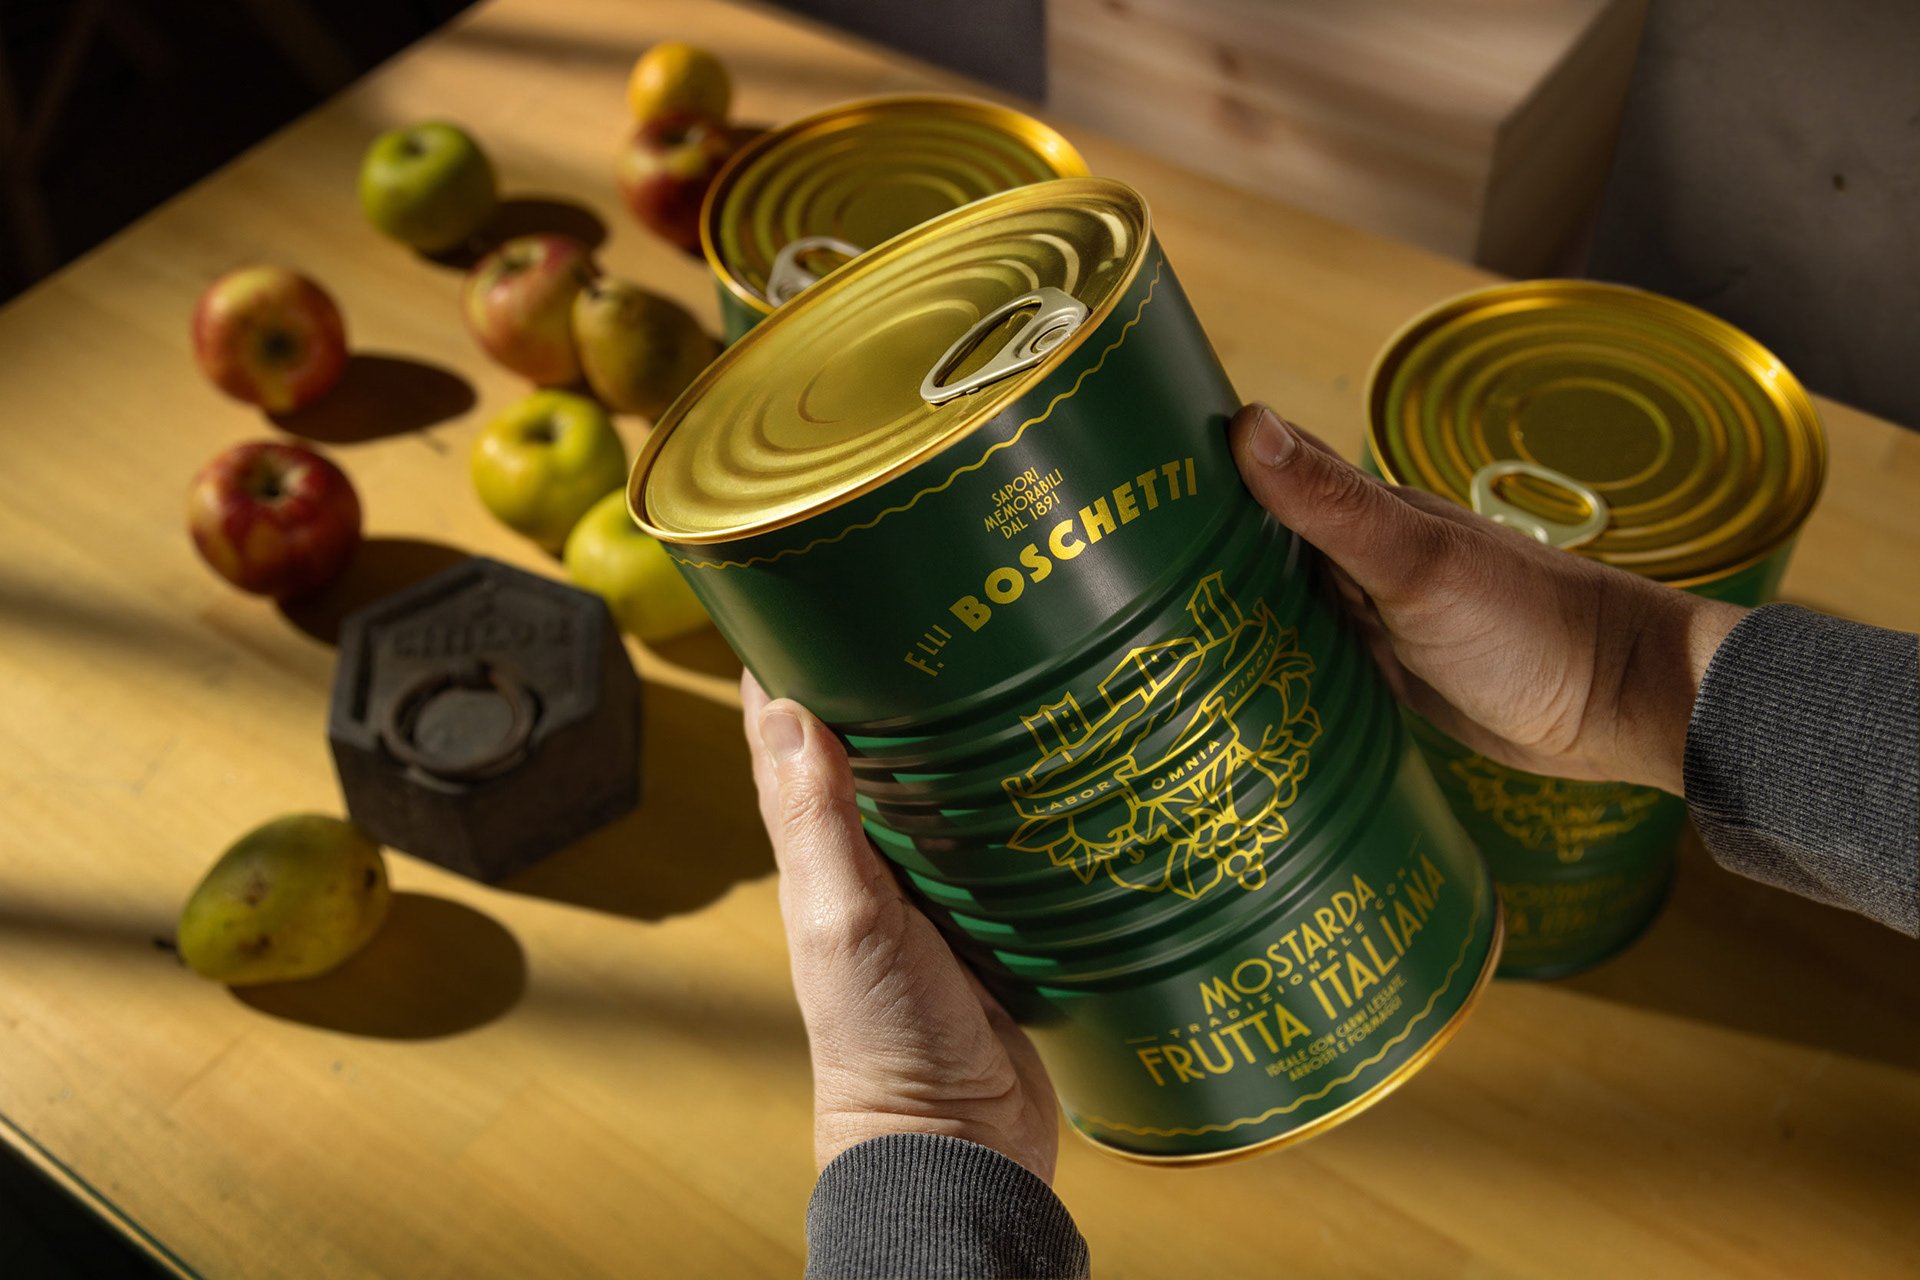 Fratelli Boschetti Makes Giant Canned Mustard Looks Fancy as Hell